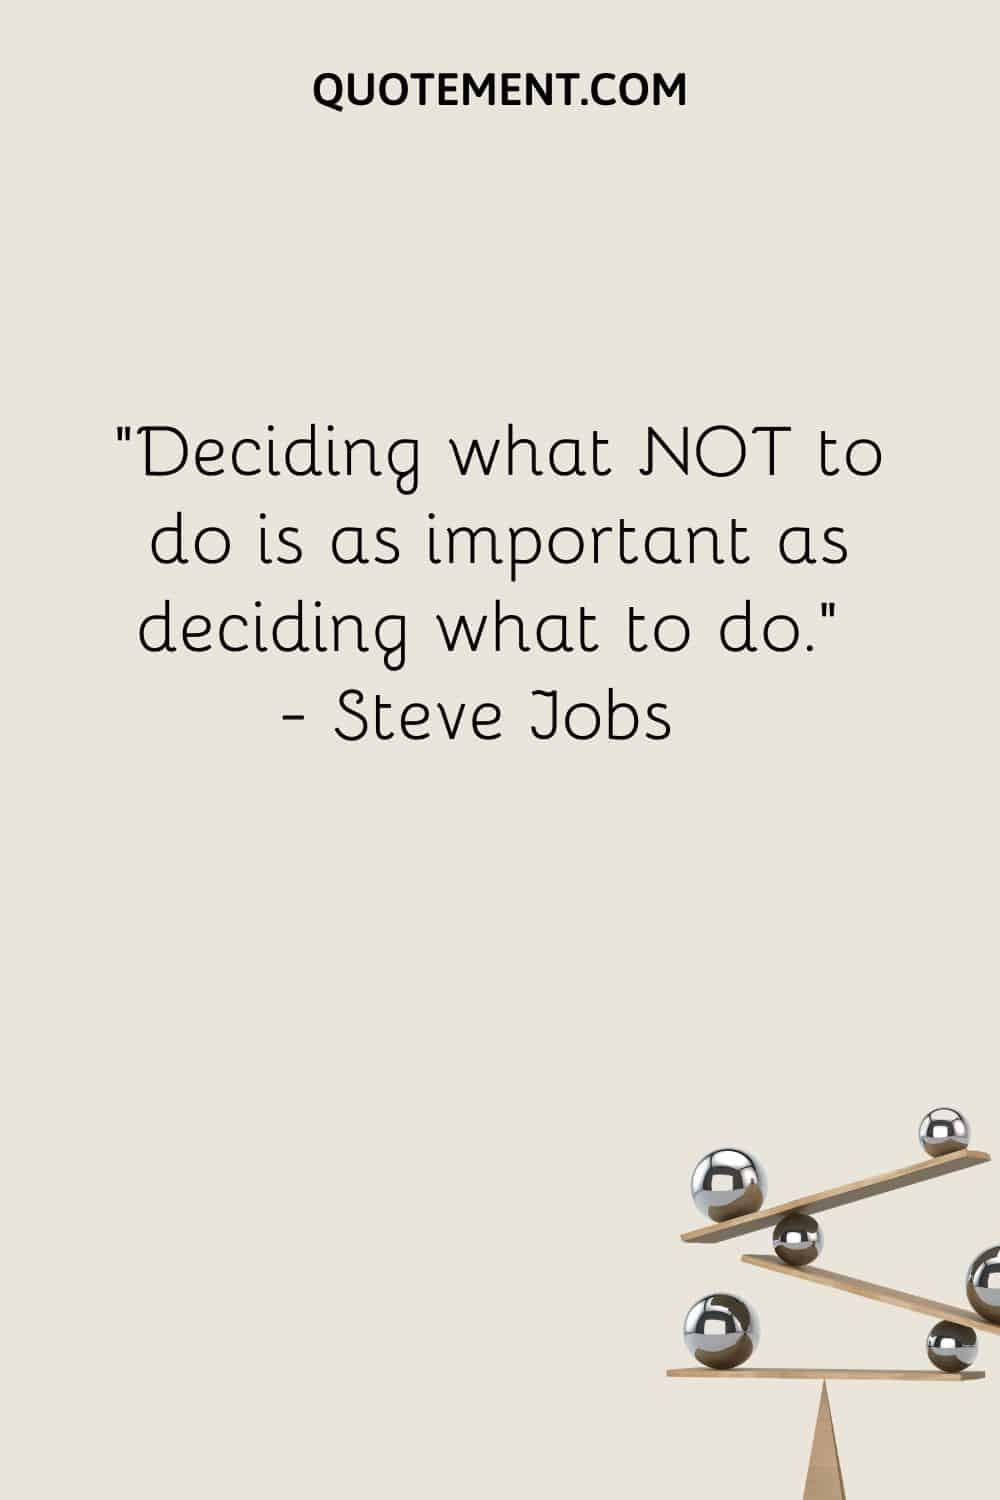 Deciding what NOT to do is as important as deciding what to do